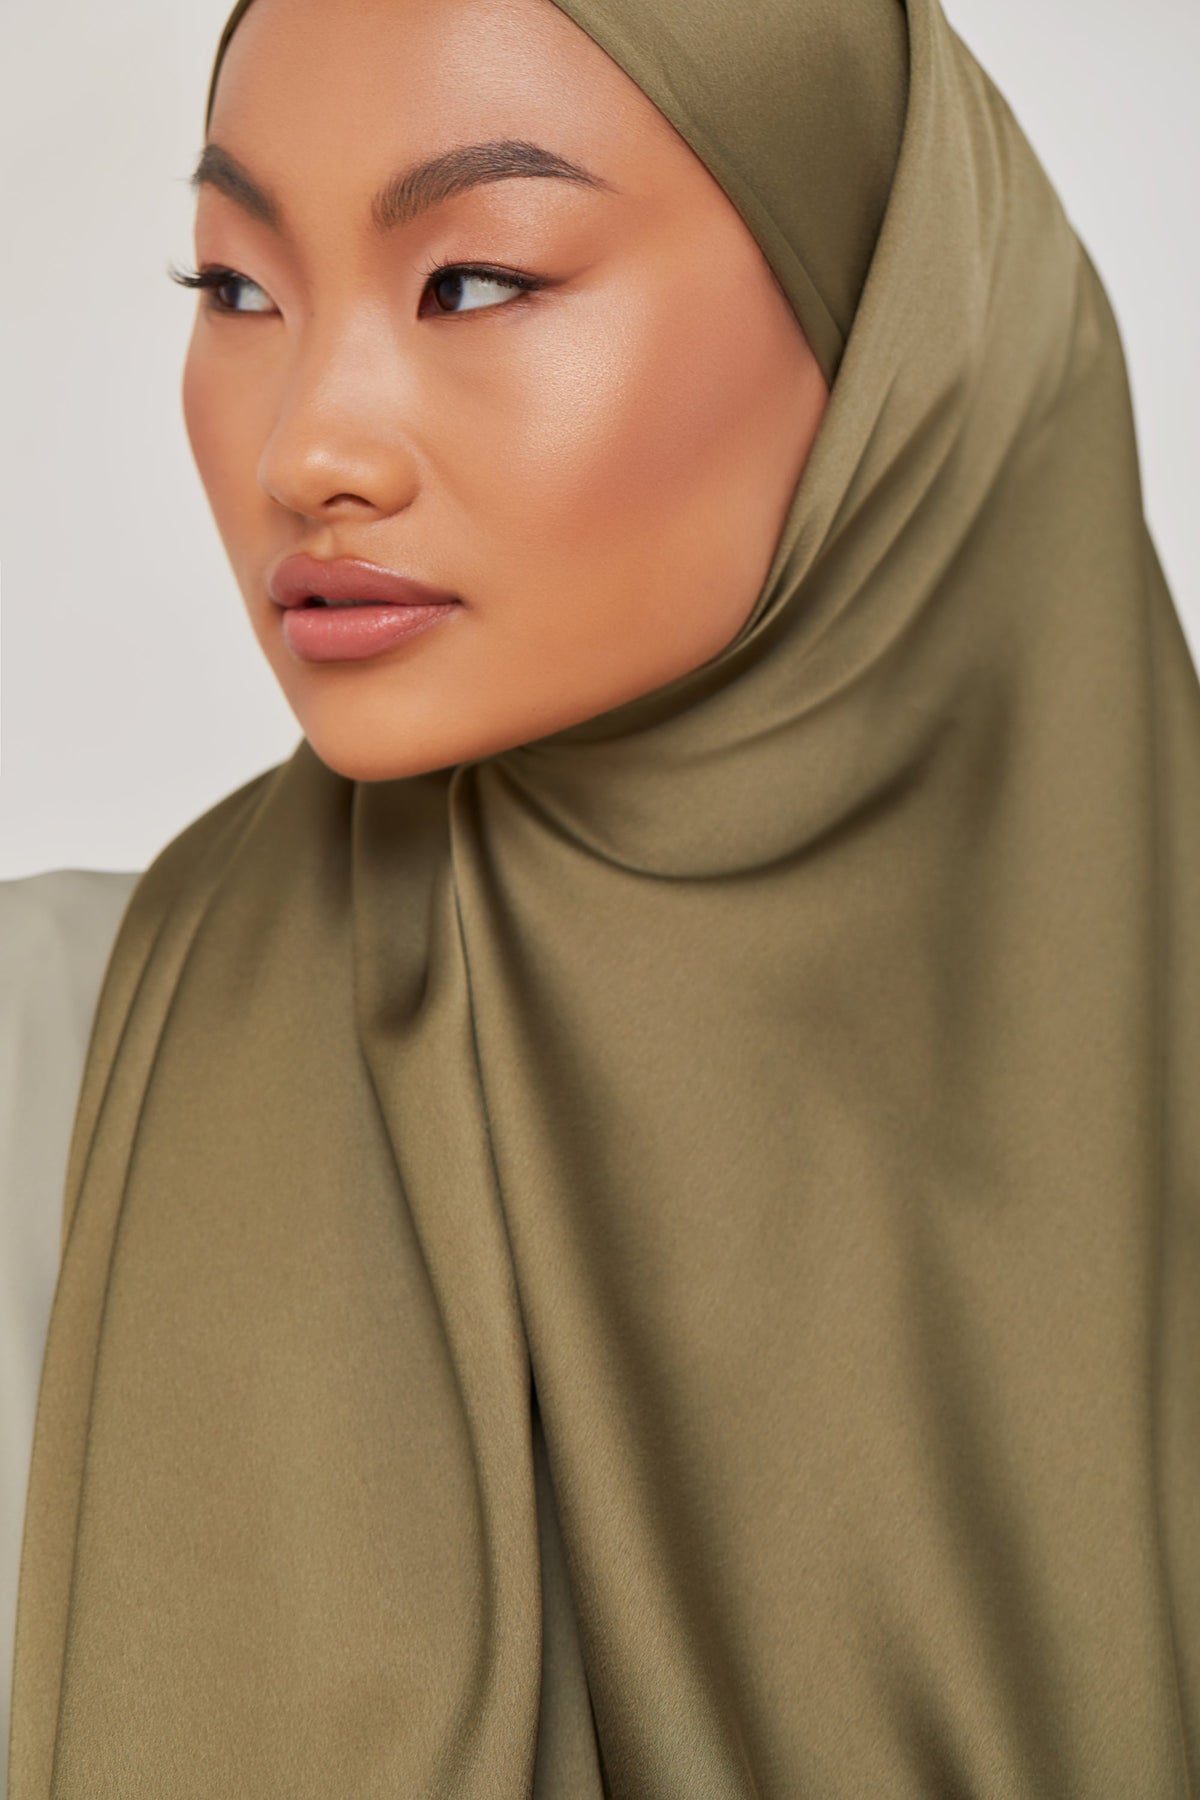 TEXTURE Satin Hijab - Grounded epschoolboard 